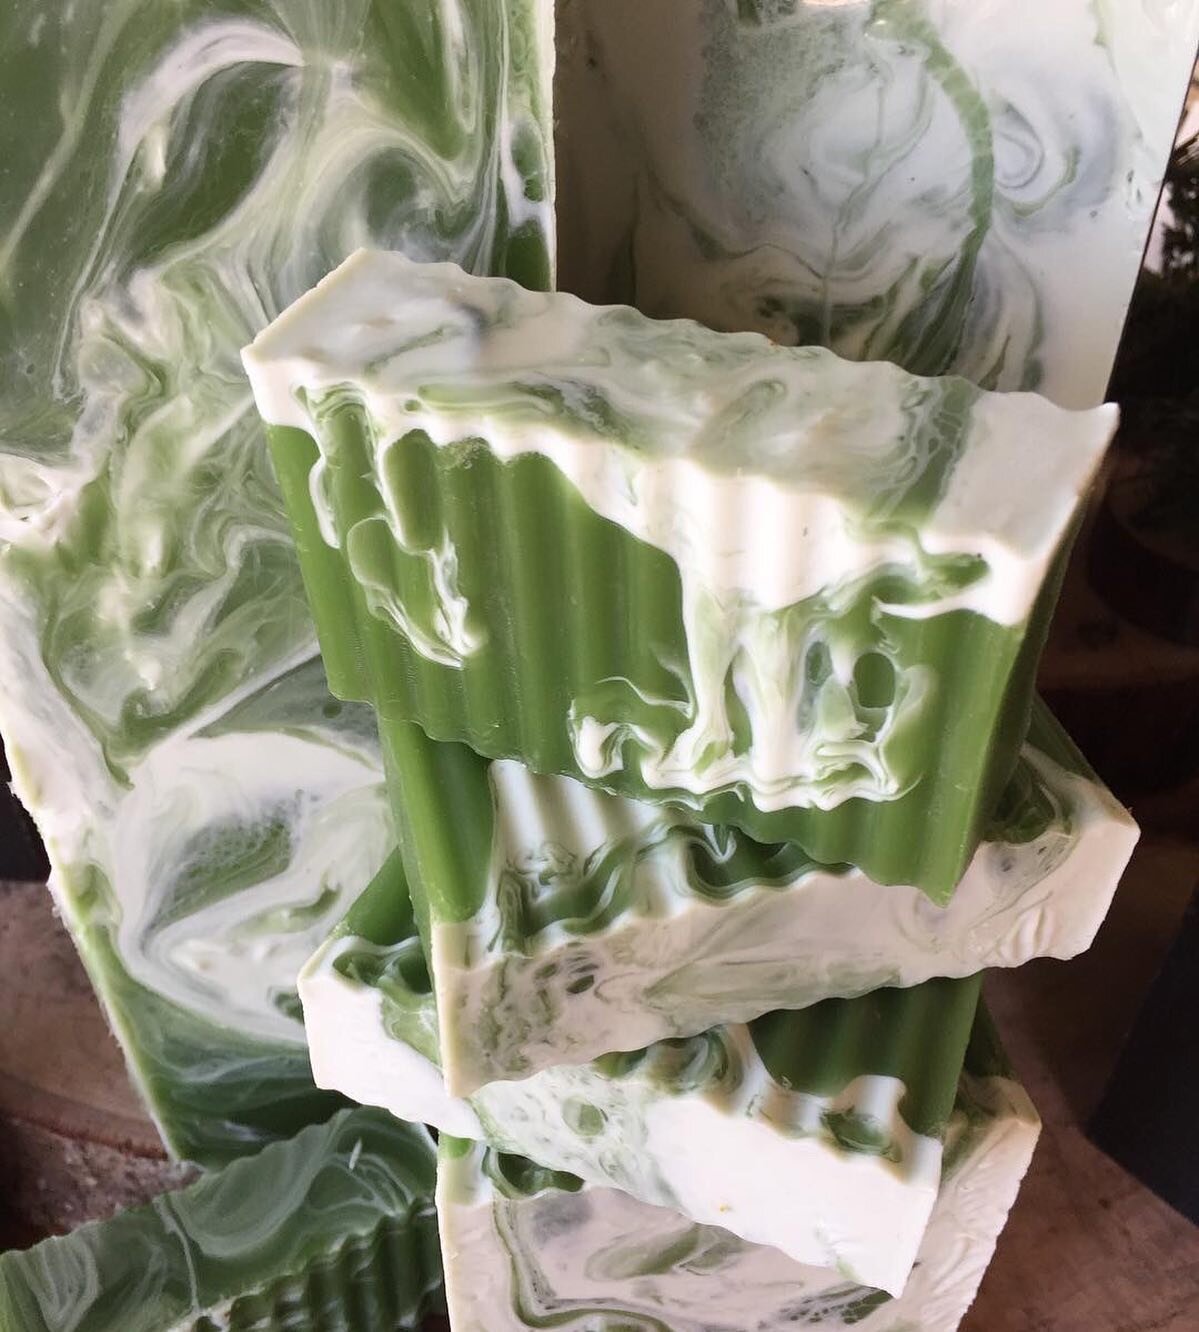 Warmer temps call for cooler soaps! 🧼 🌿 💨 Cooling Mint is a warm weather essential! Refreshing peppermint, cooling spearmint and a touch of organic vanilla extract make this the perfect summer must-have. Available all the places! Order at Strawber